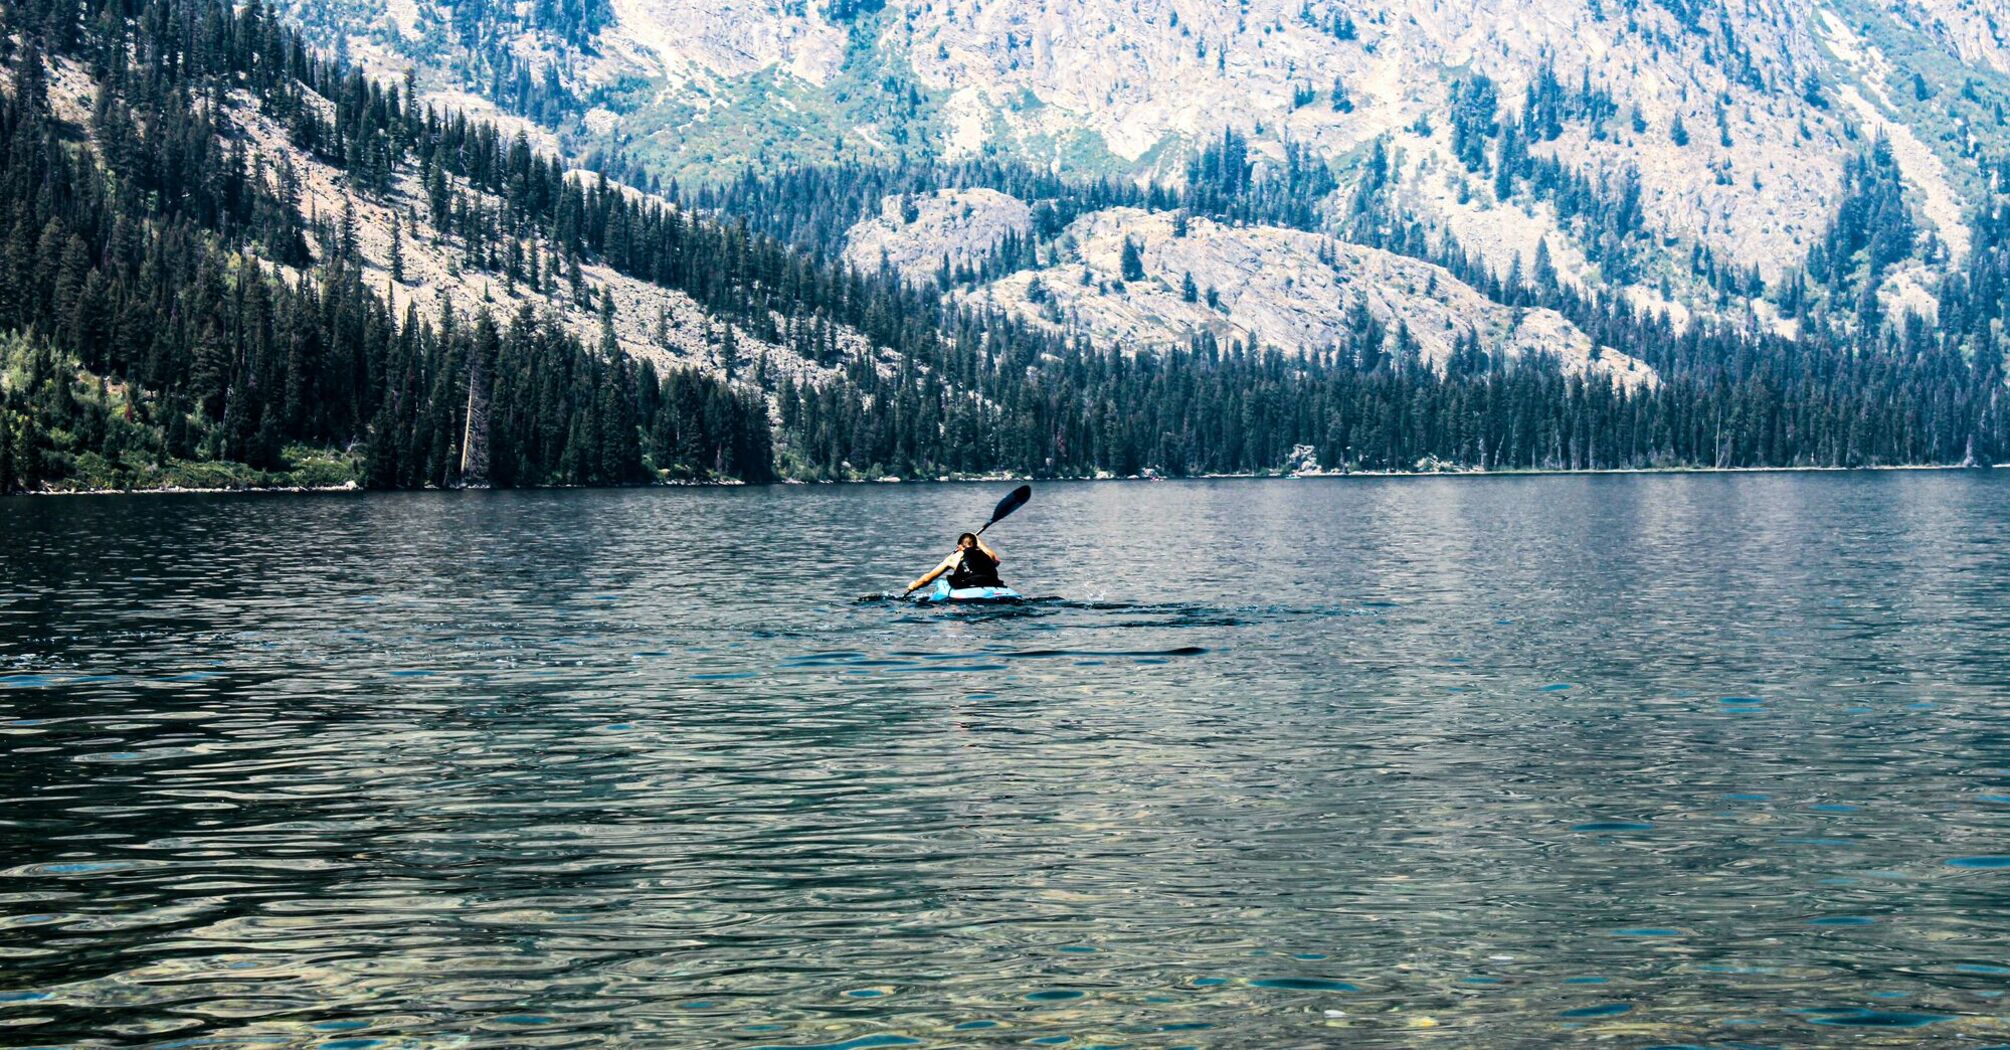 a-person-on-a-surfboard-in-a-lake